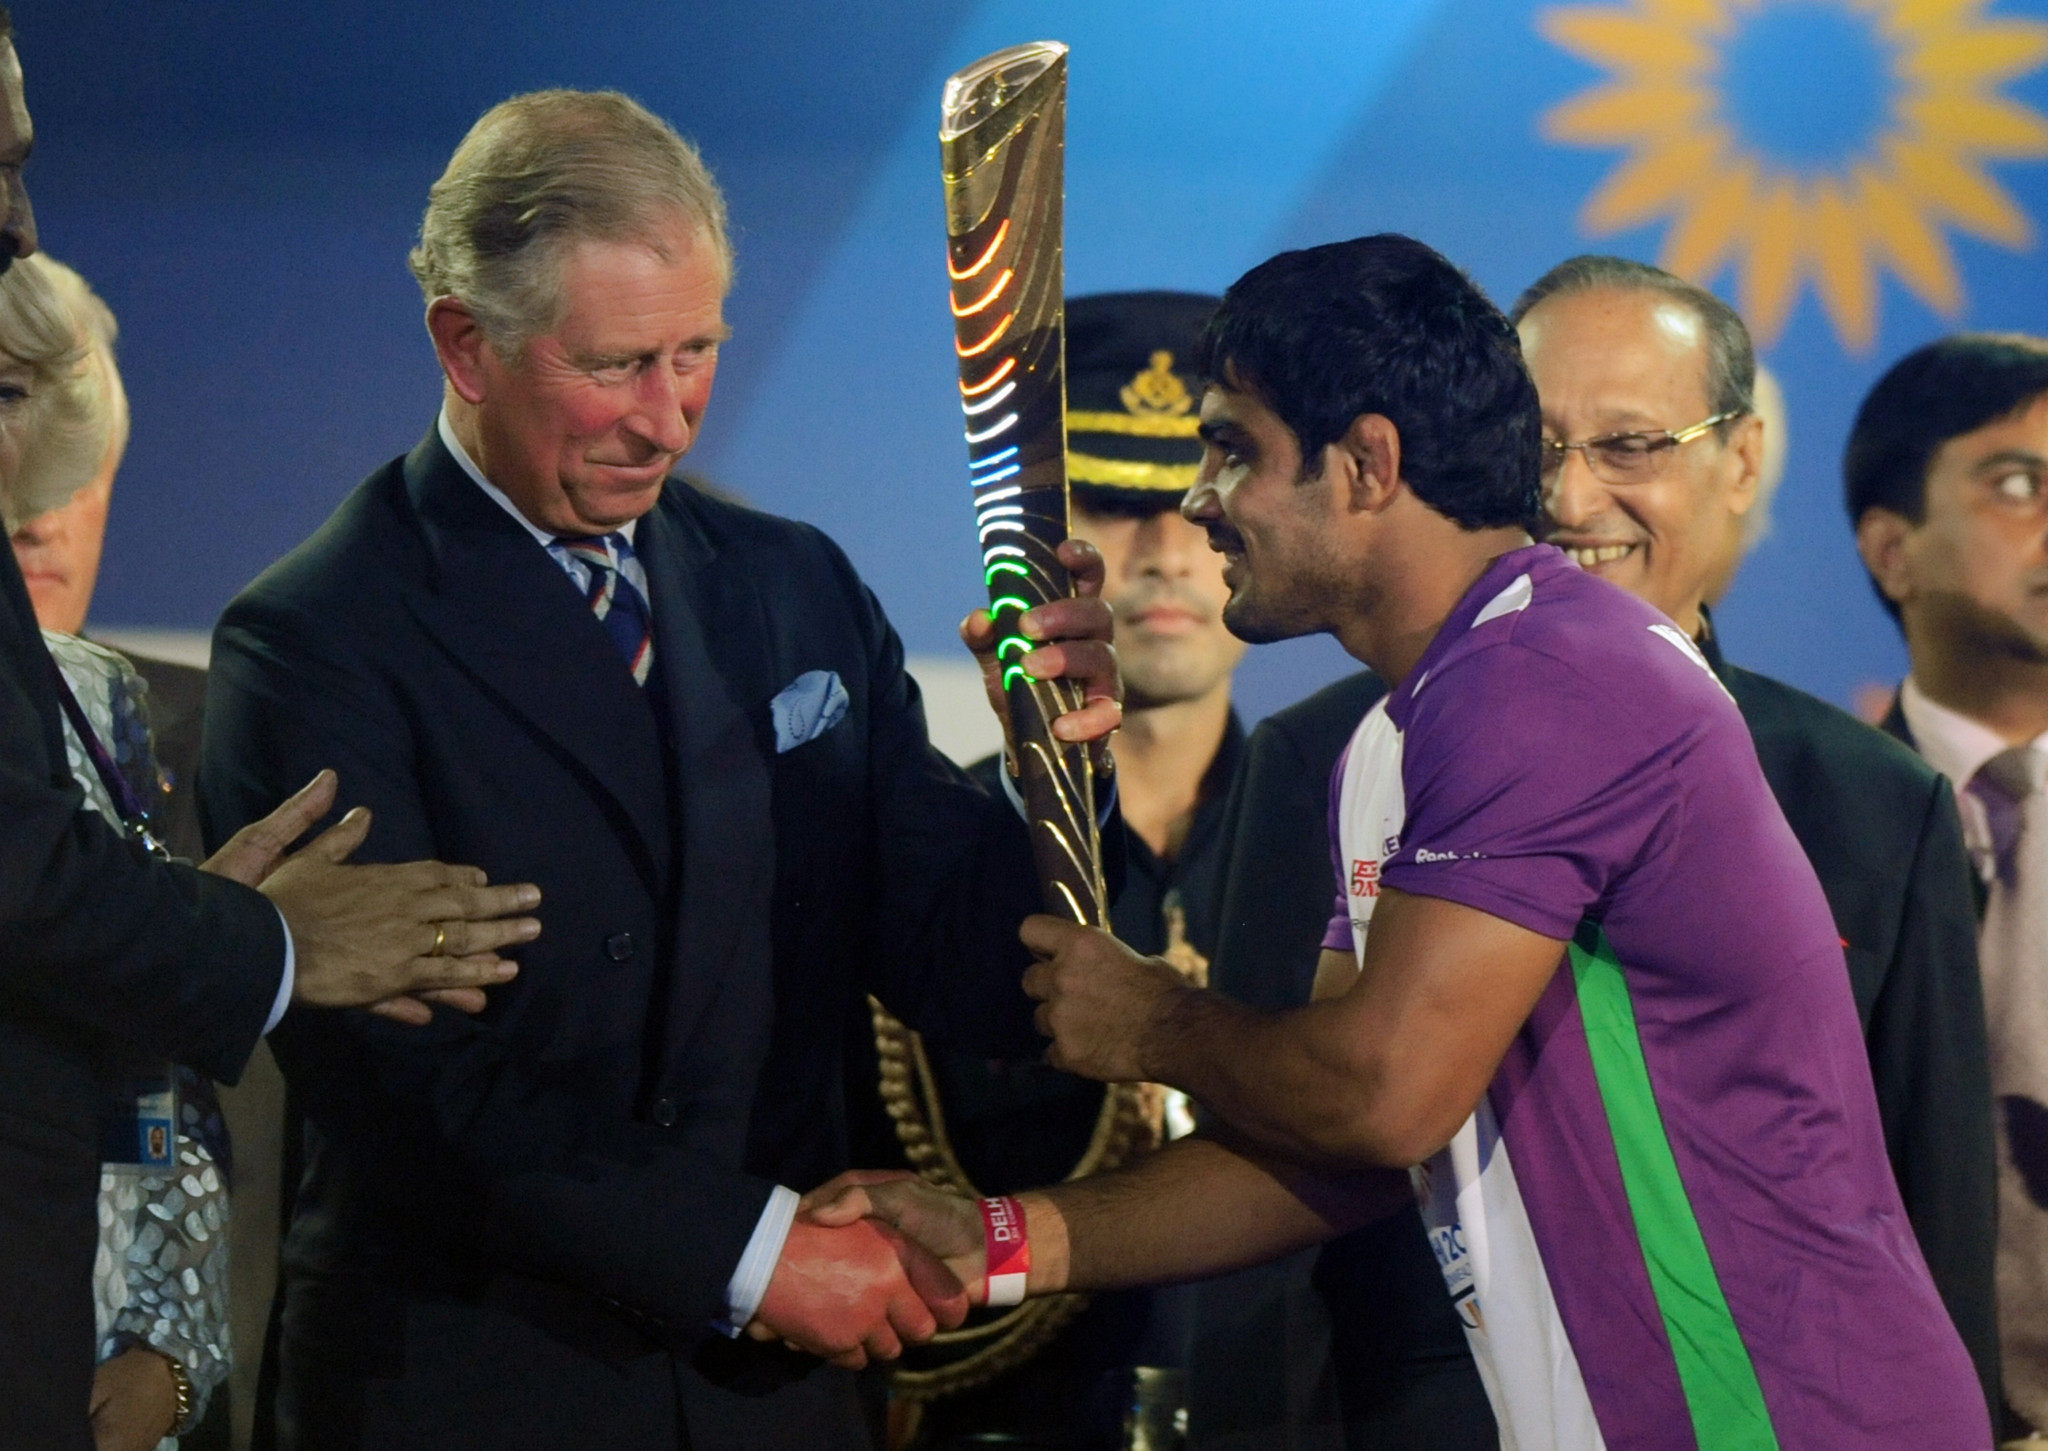 Prince Charles, the Prince of Wales, receives the Queen's Baton from Indian wrestler Sushil Kumar at the XIX Commonwealth Games opening ceremony in New Delhi in 2010. The Prince will again play a leading role in Gold Coast ©Getty Images